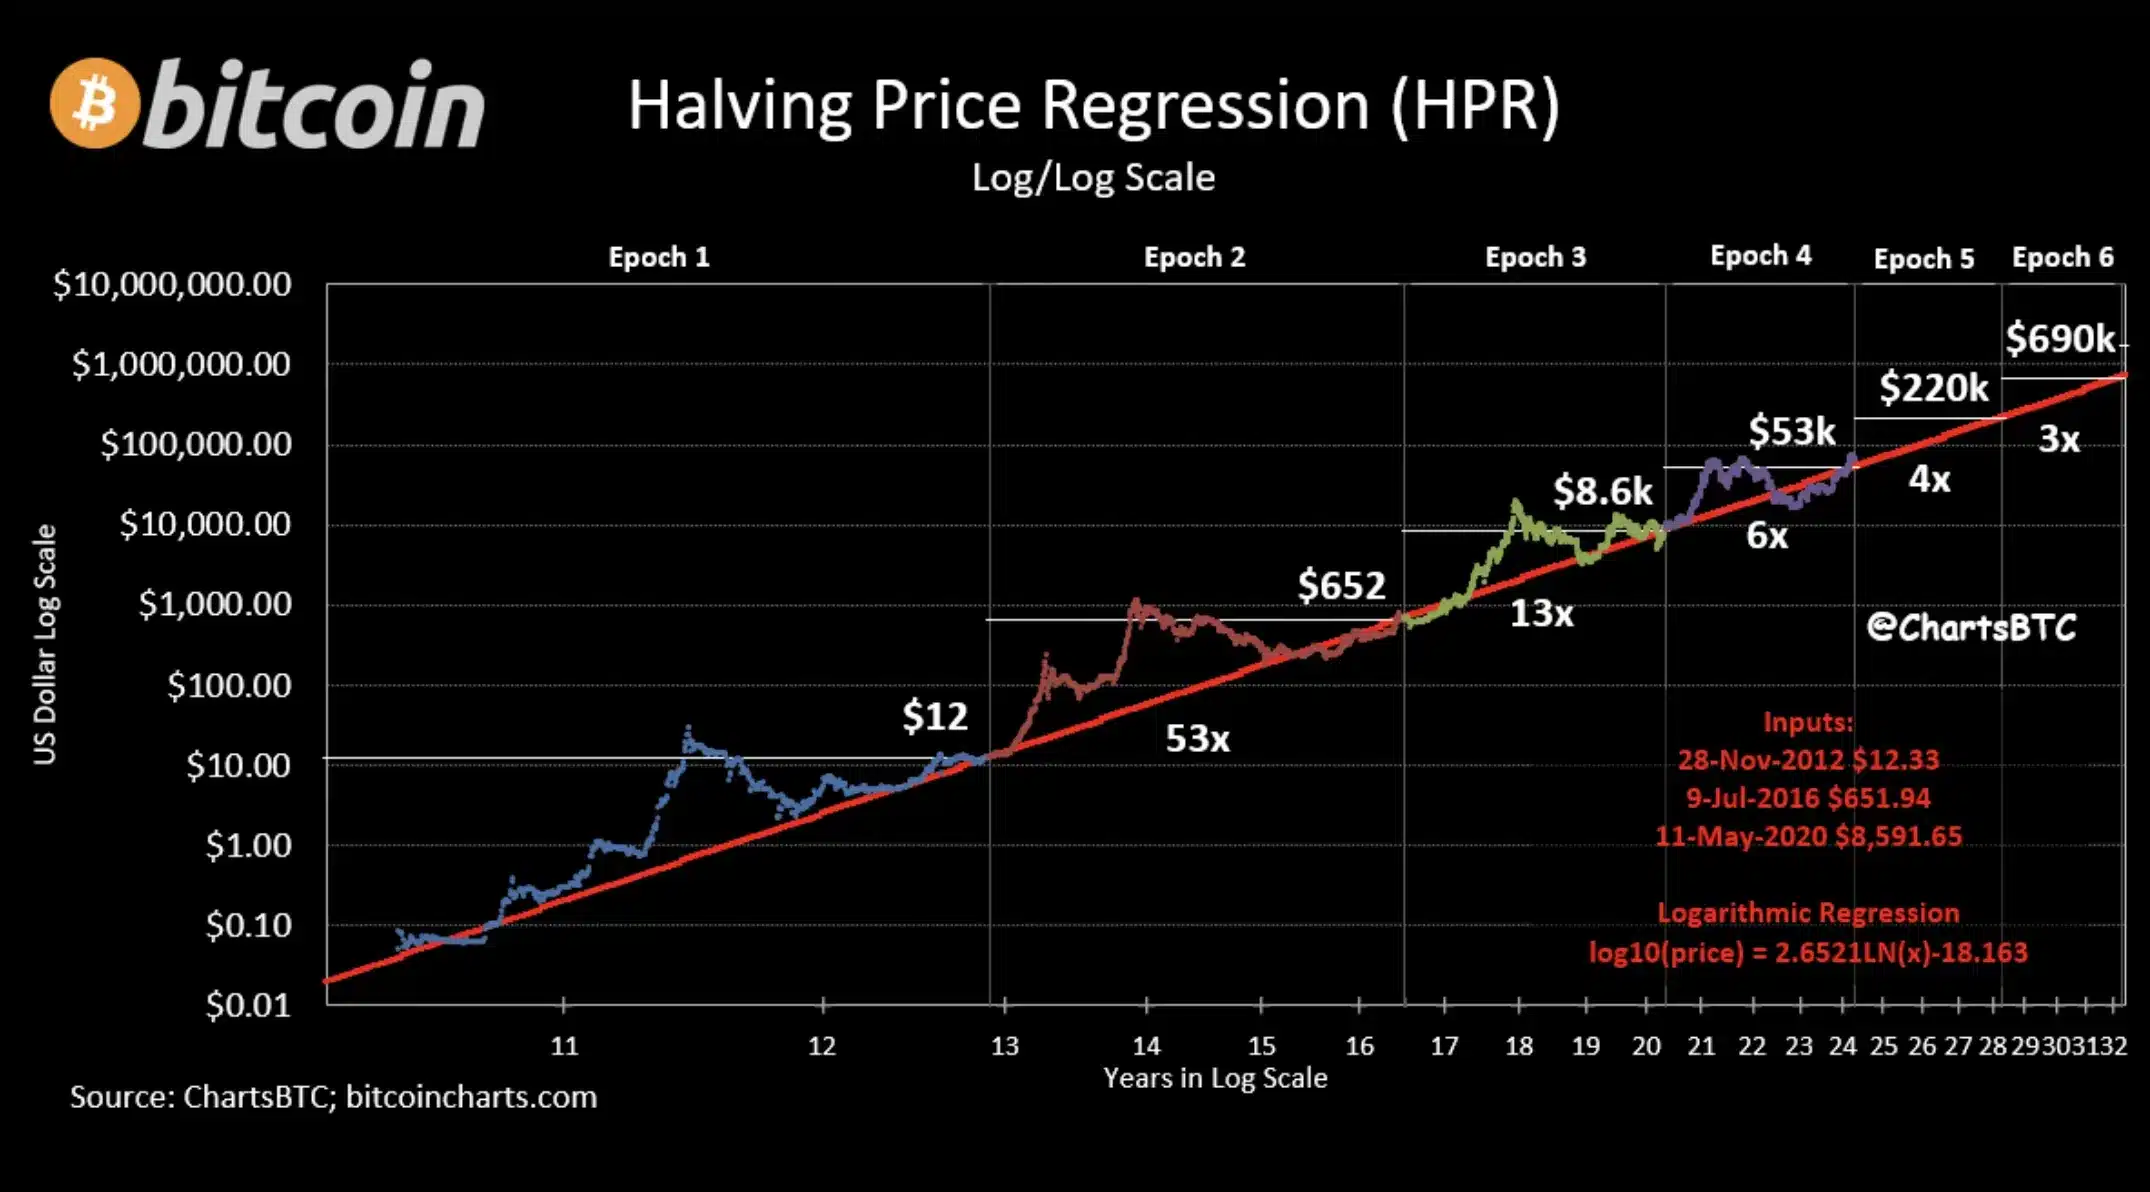 Bitcoin's rise after the halving follows historical patterns.